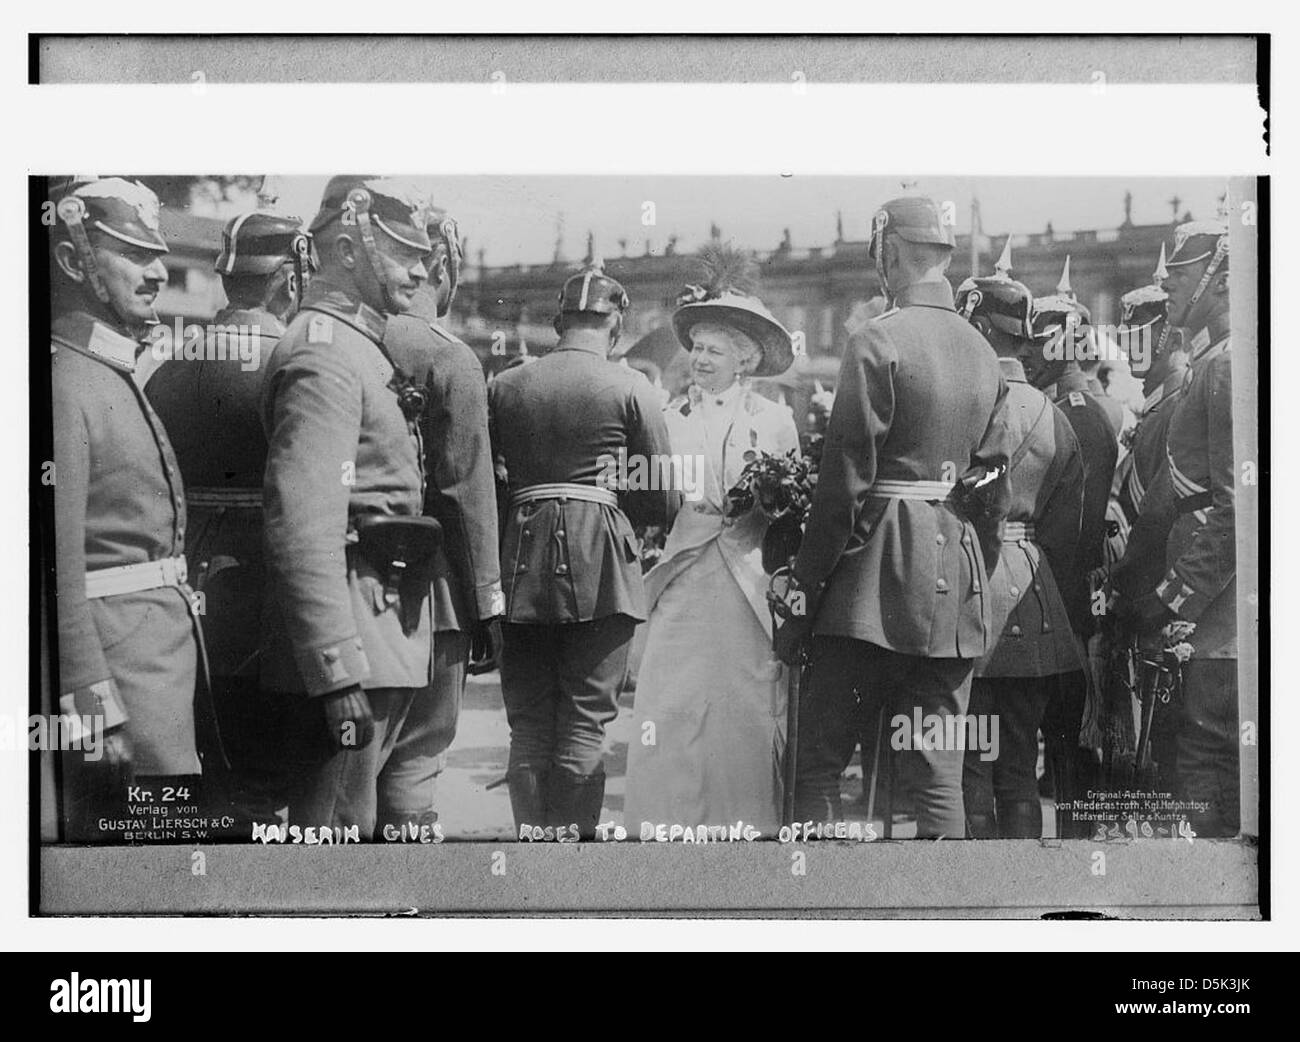 Kaiserin gives roses to departing officers (LOC) Stock Photo